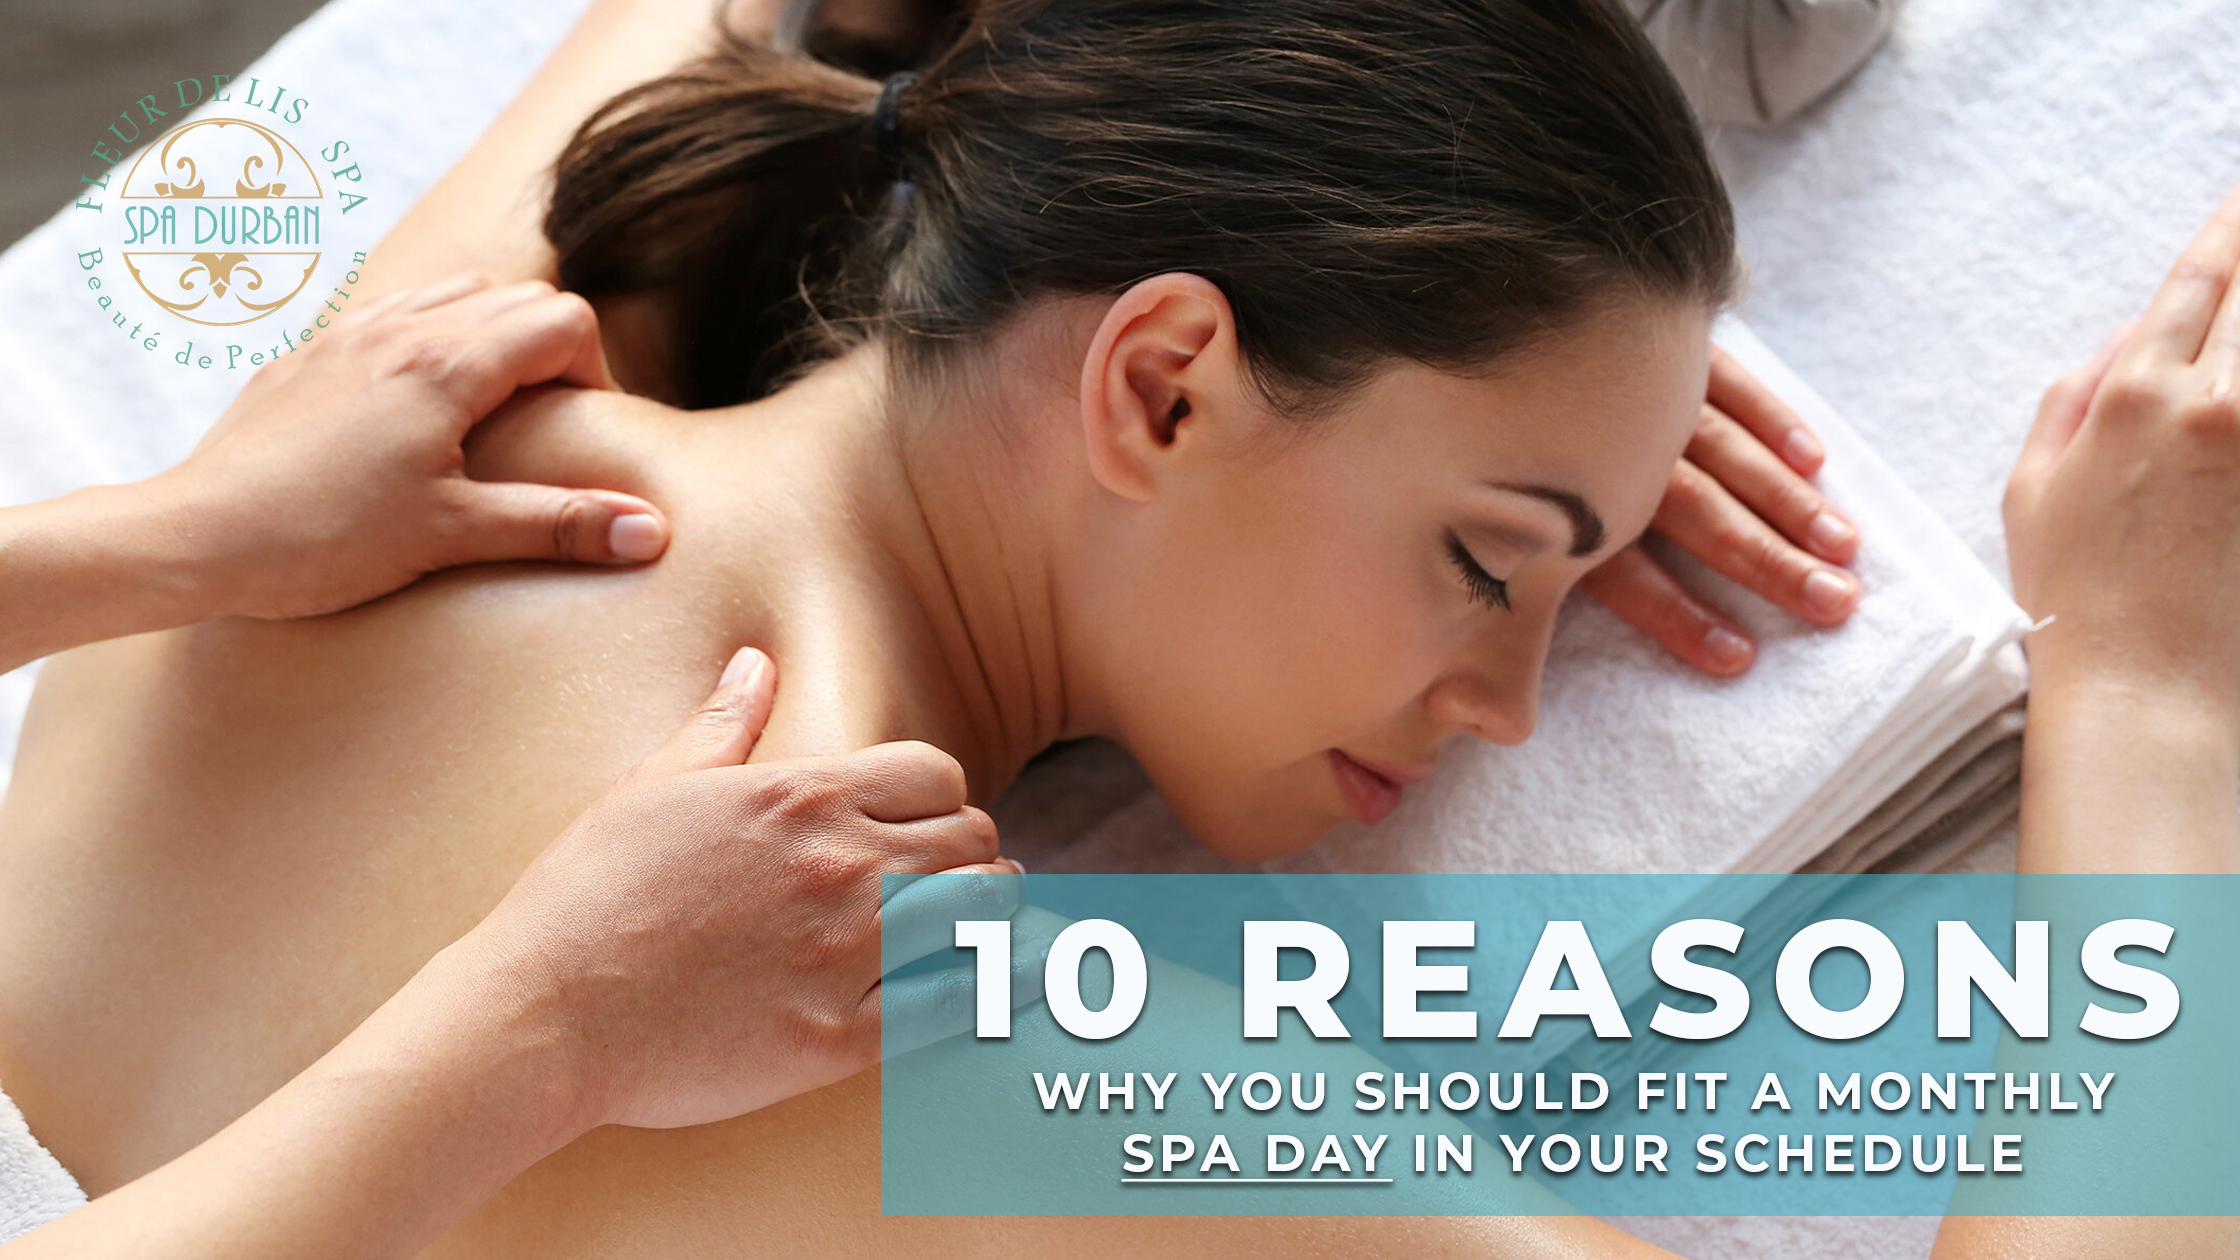 10 Reasons Why You Should Fit a Monthly Spa Day in Your Schedule